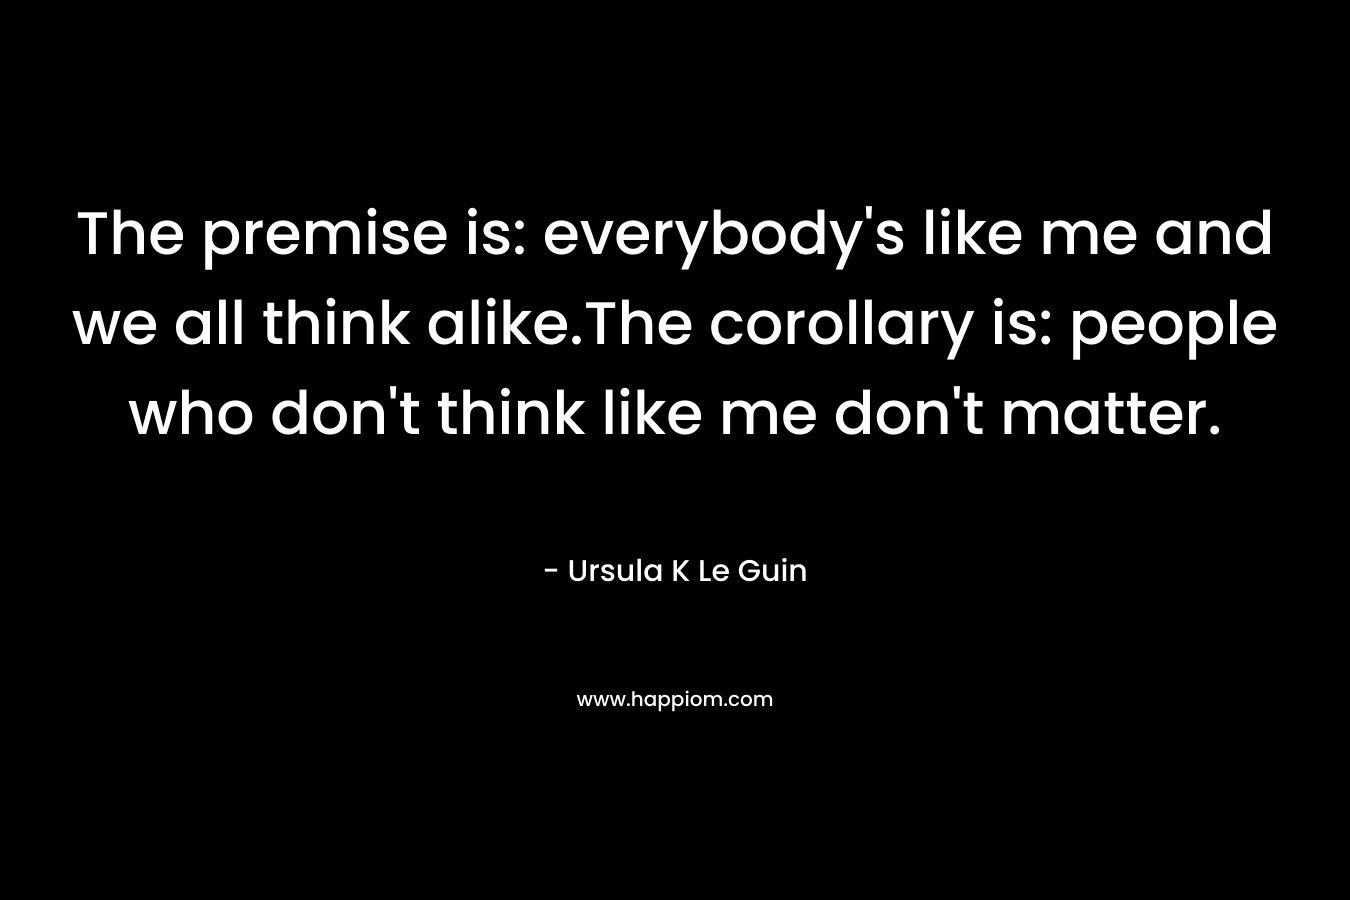 The premise is: everybody’s like me and we all think alike.The corollary is: people who don’t think like me don’t matter. – Ursula K Le Guin